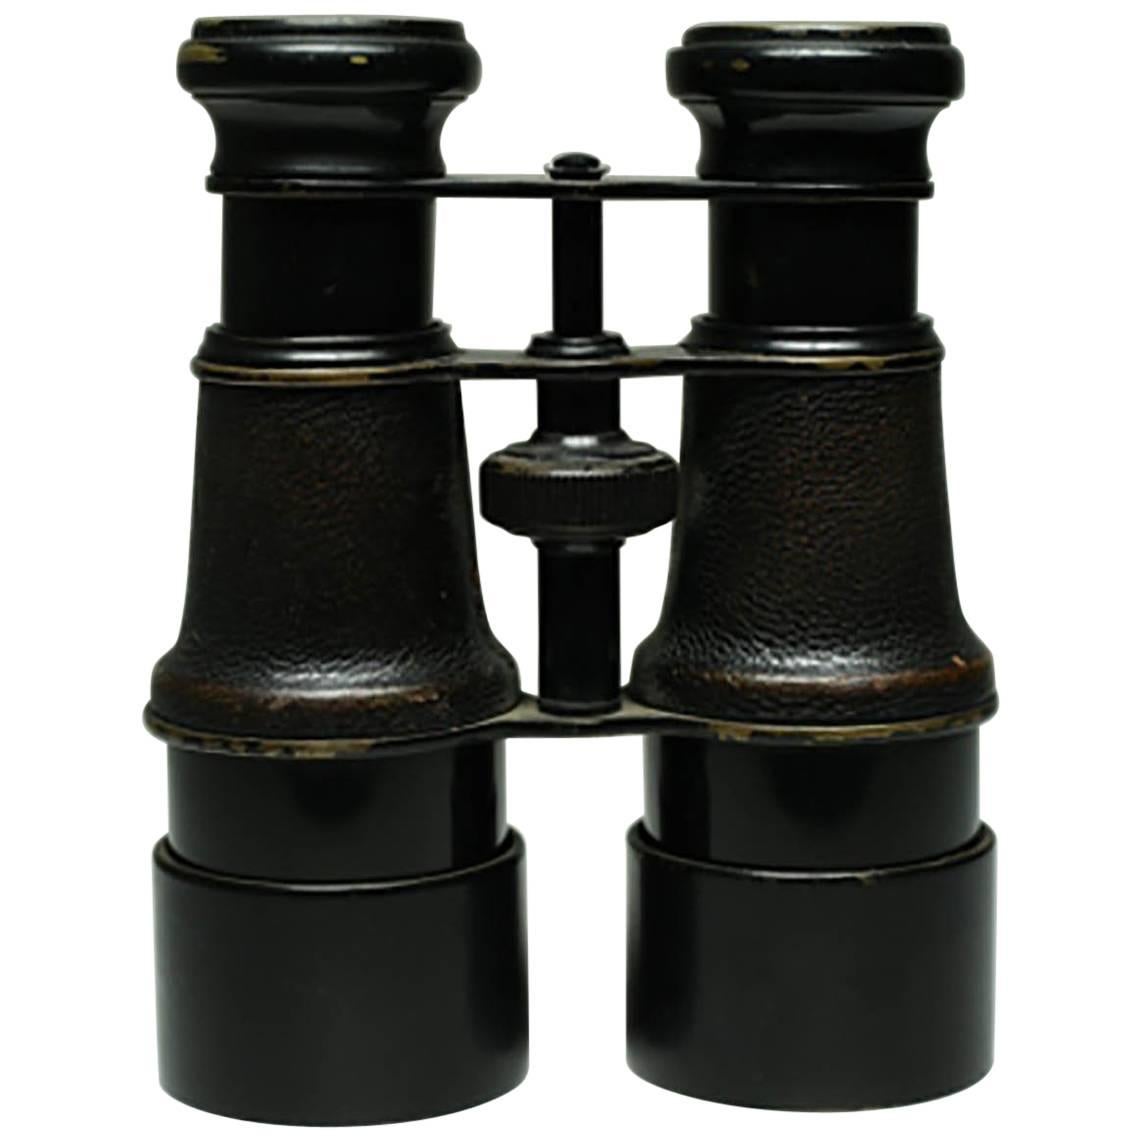 Early 20th Century Leather Wrapped Binoculars, Paris, France, circa 1890s